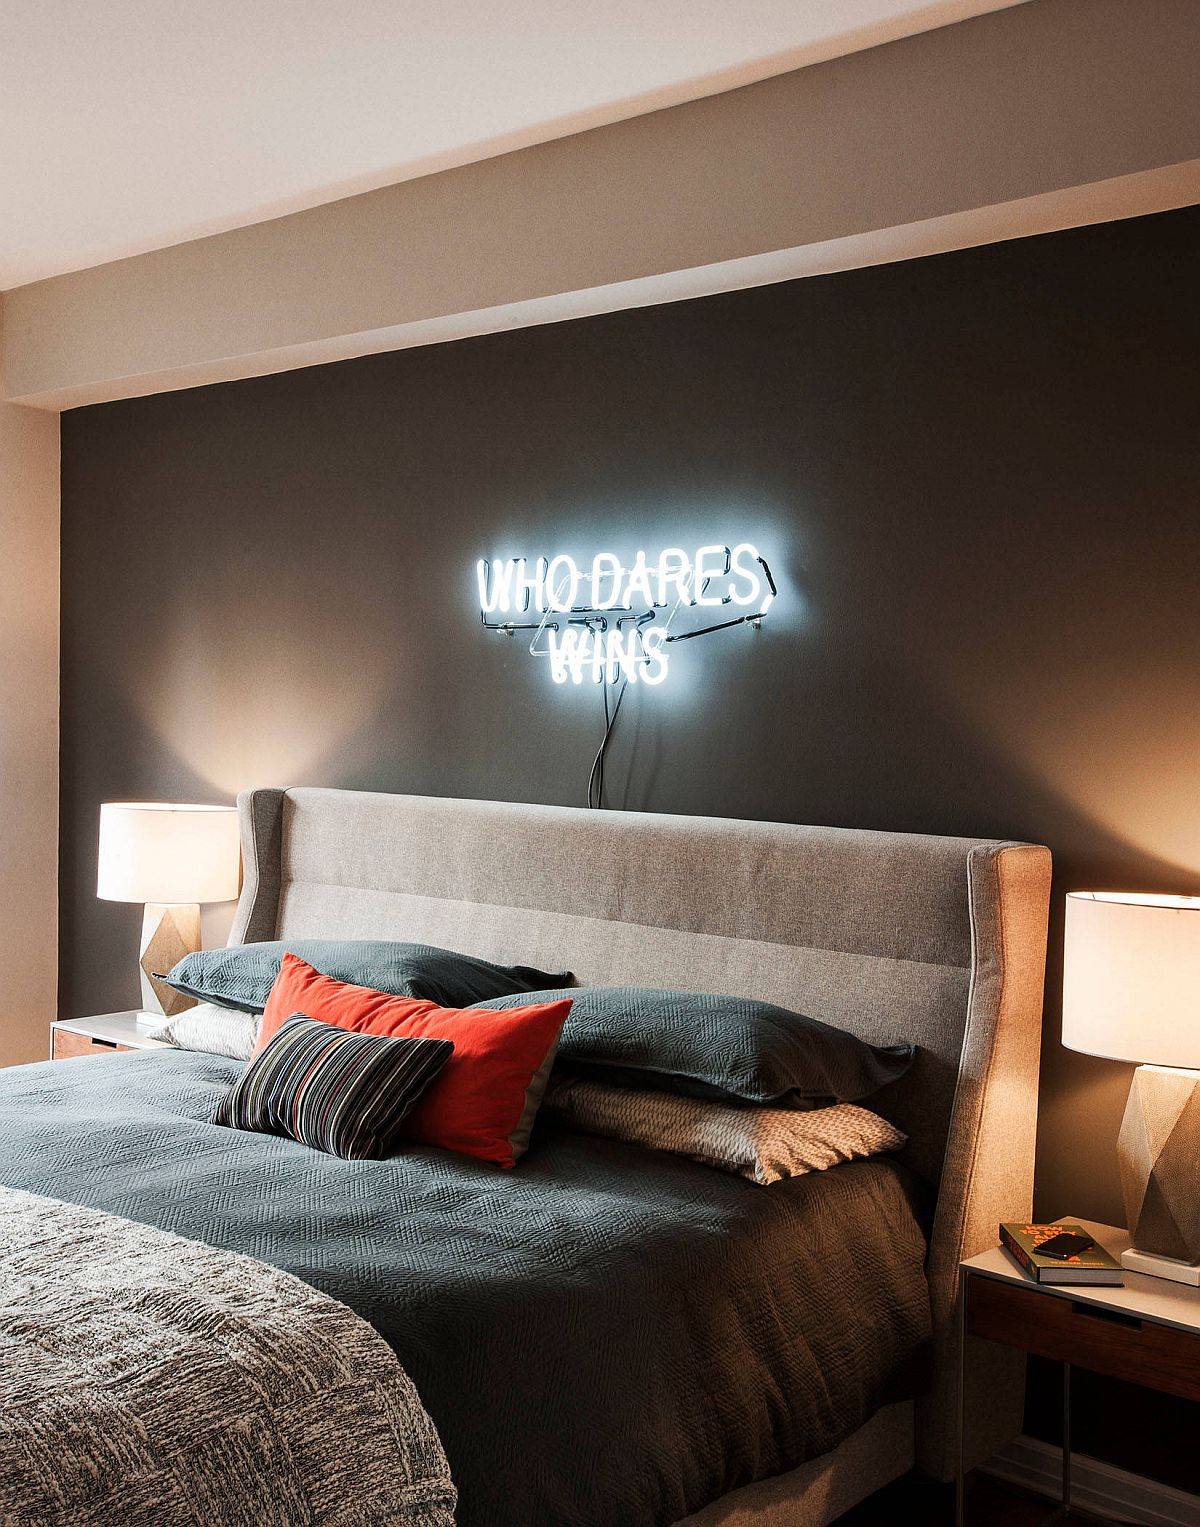 Illuminated-sign-on-the-wall-only-adds-to-the-aura-of-this-classy-bachelor-bedroom-59400